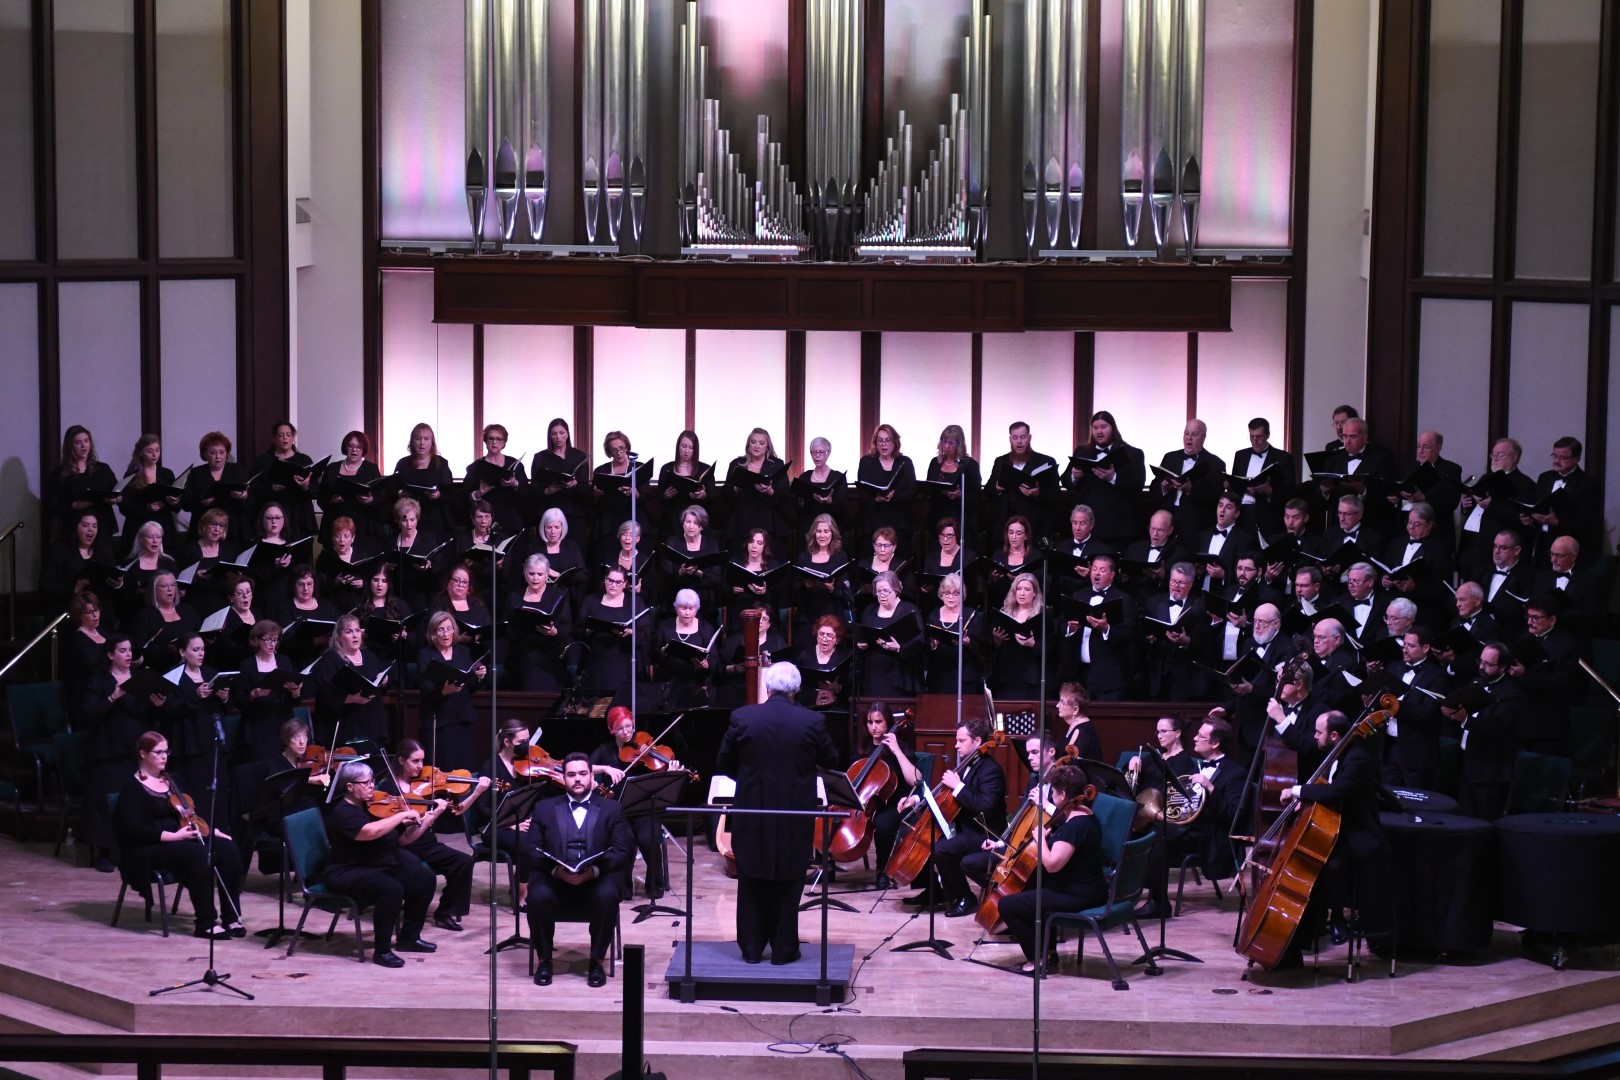 Texas Master Chorale PresentsÂ For Love of Country in April